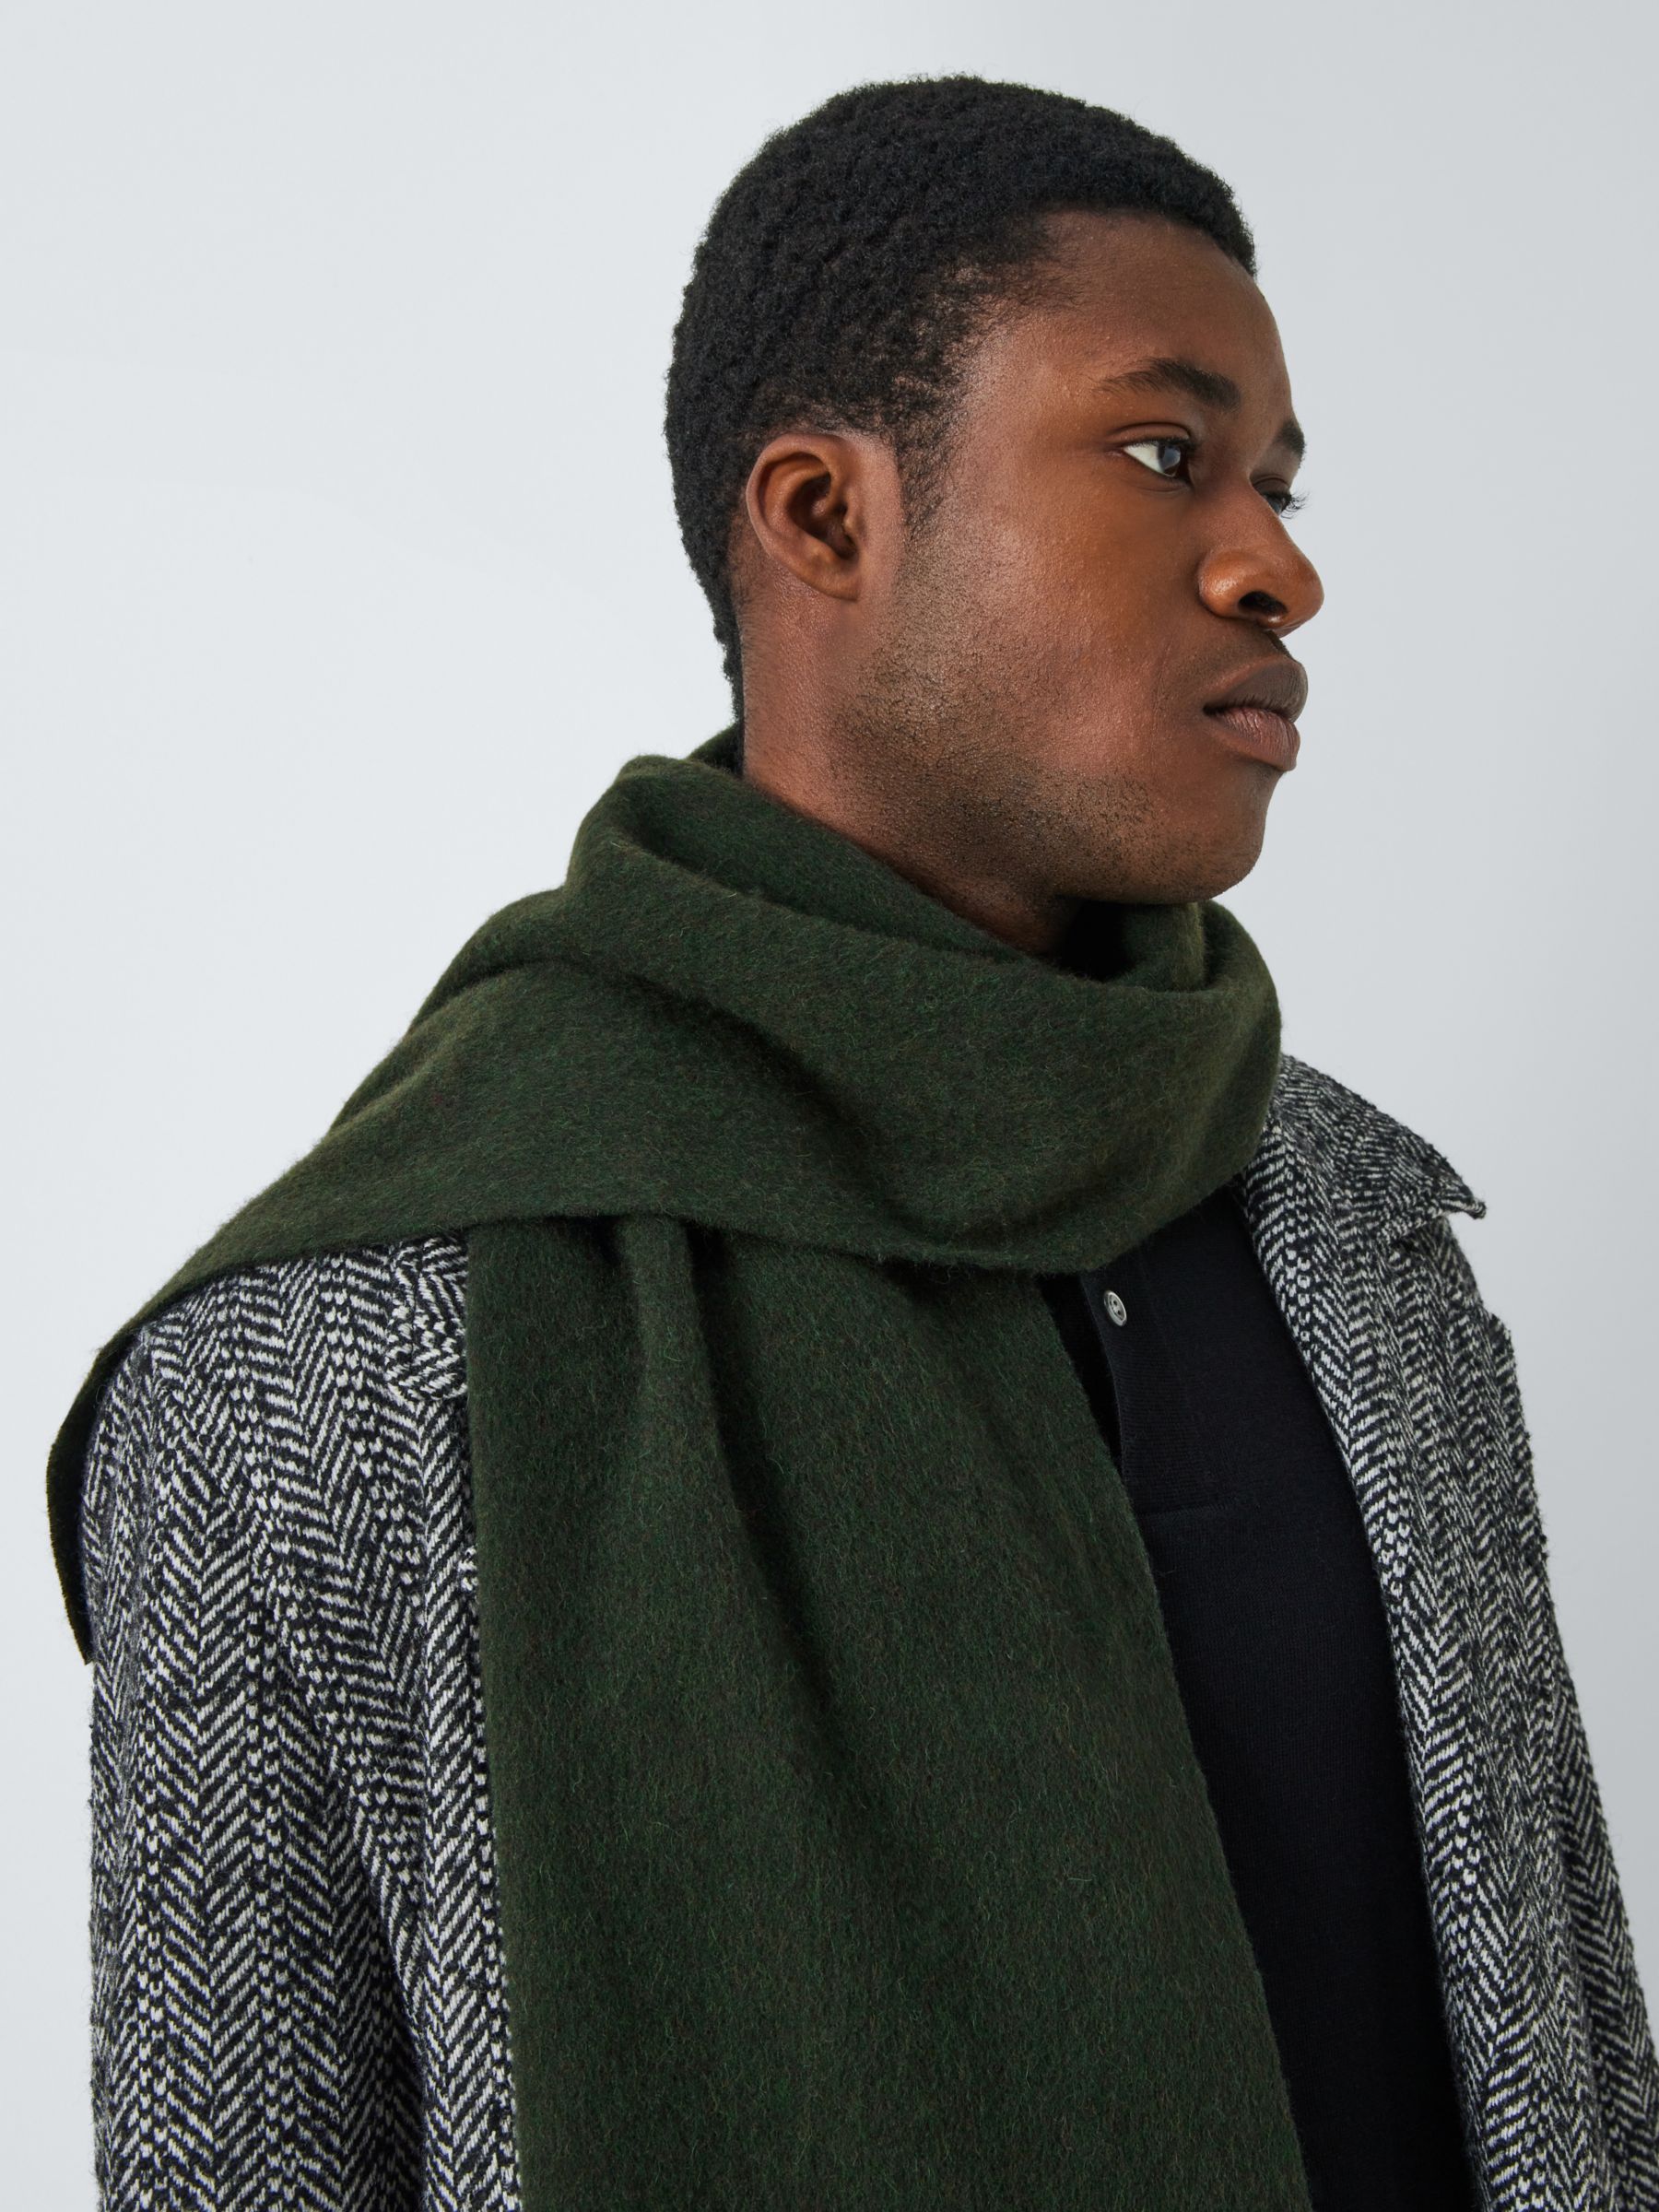 Barbour Plain Lambswool Scarf